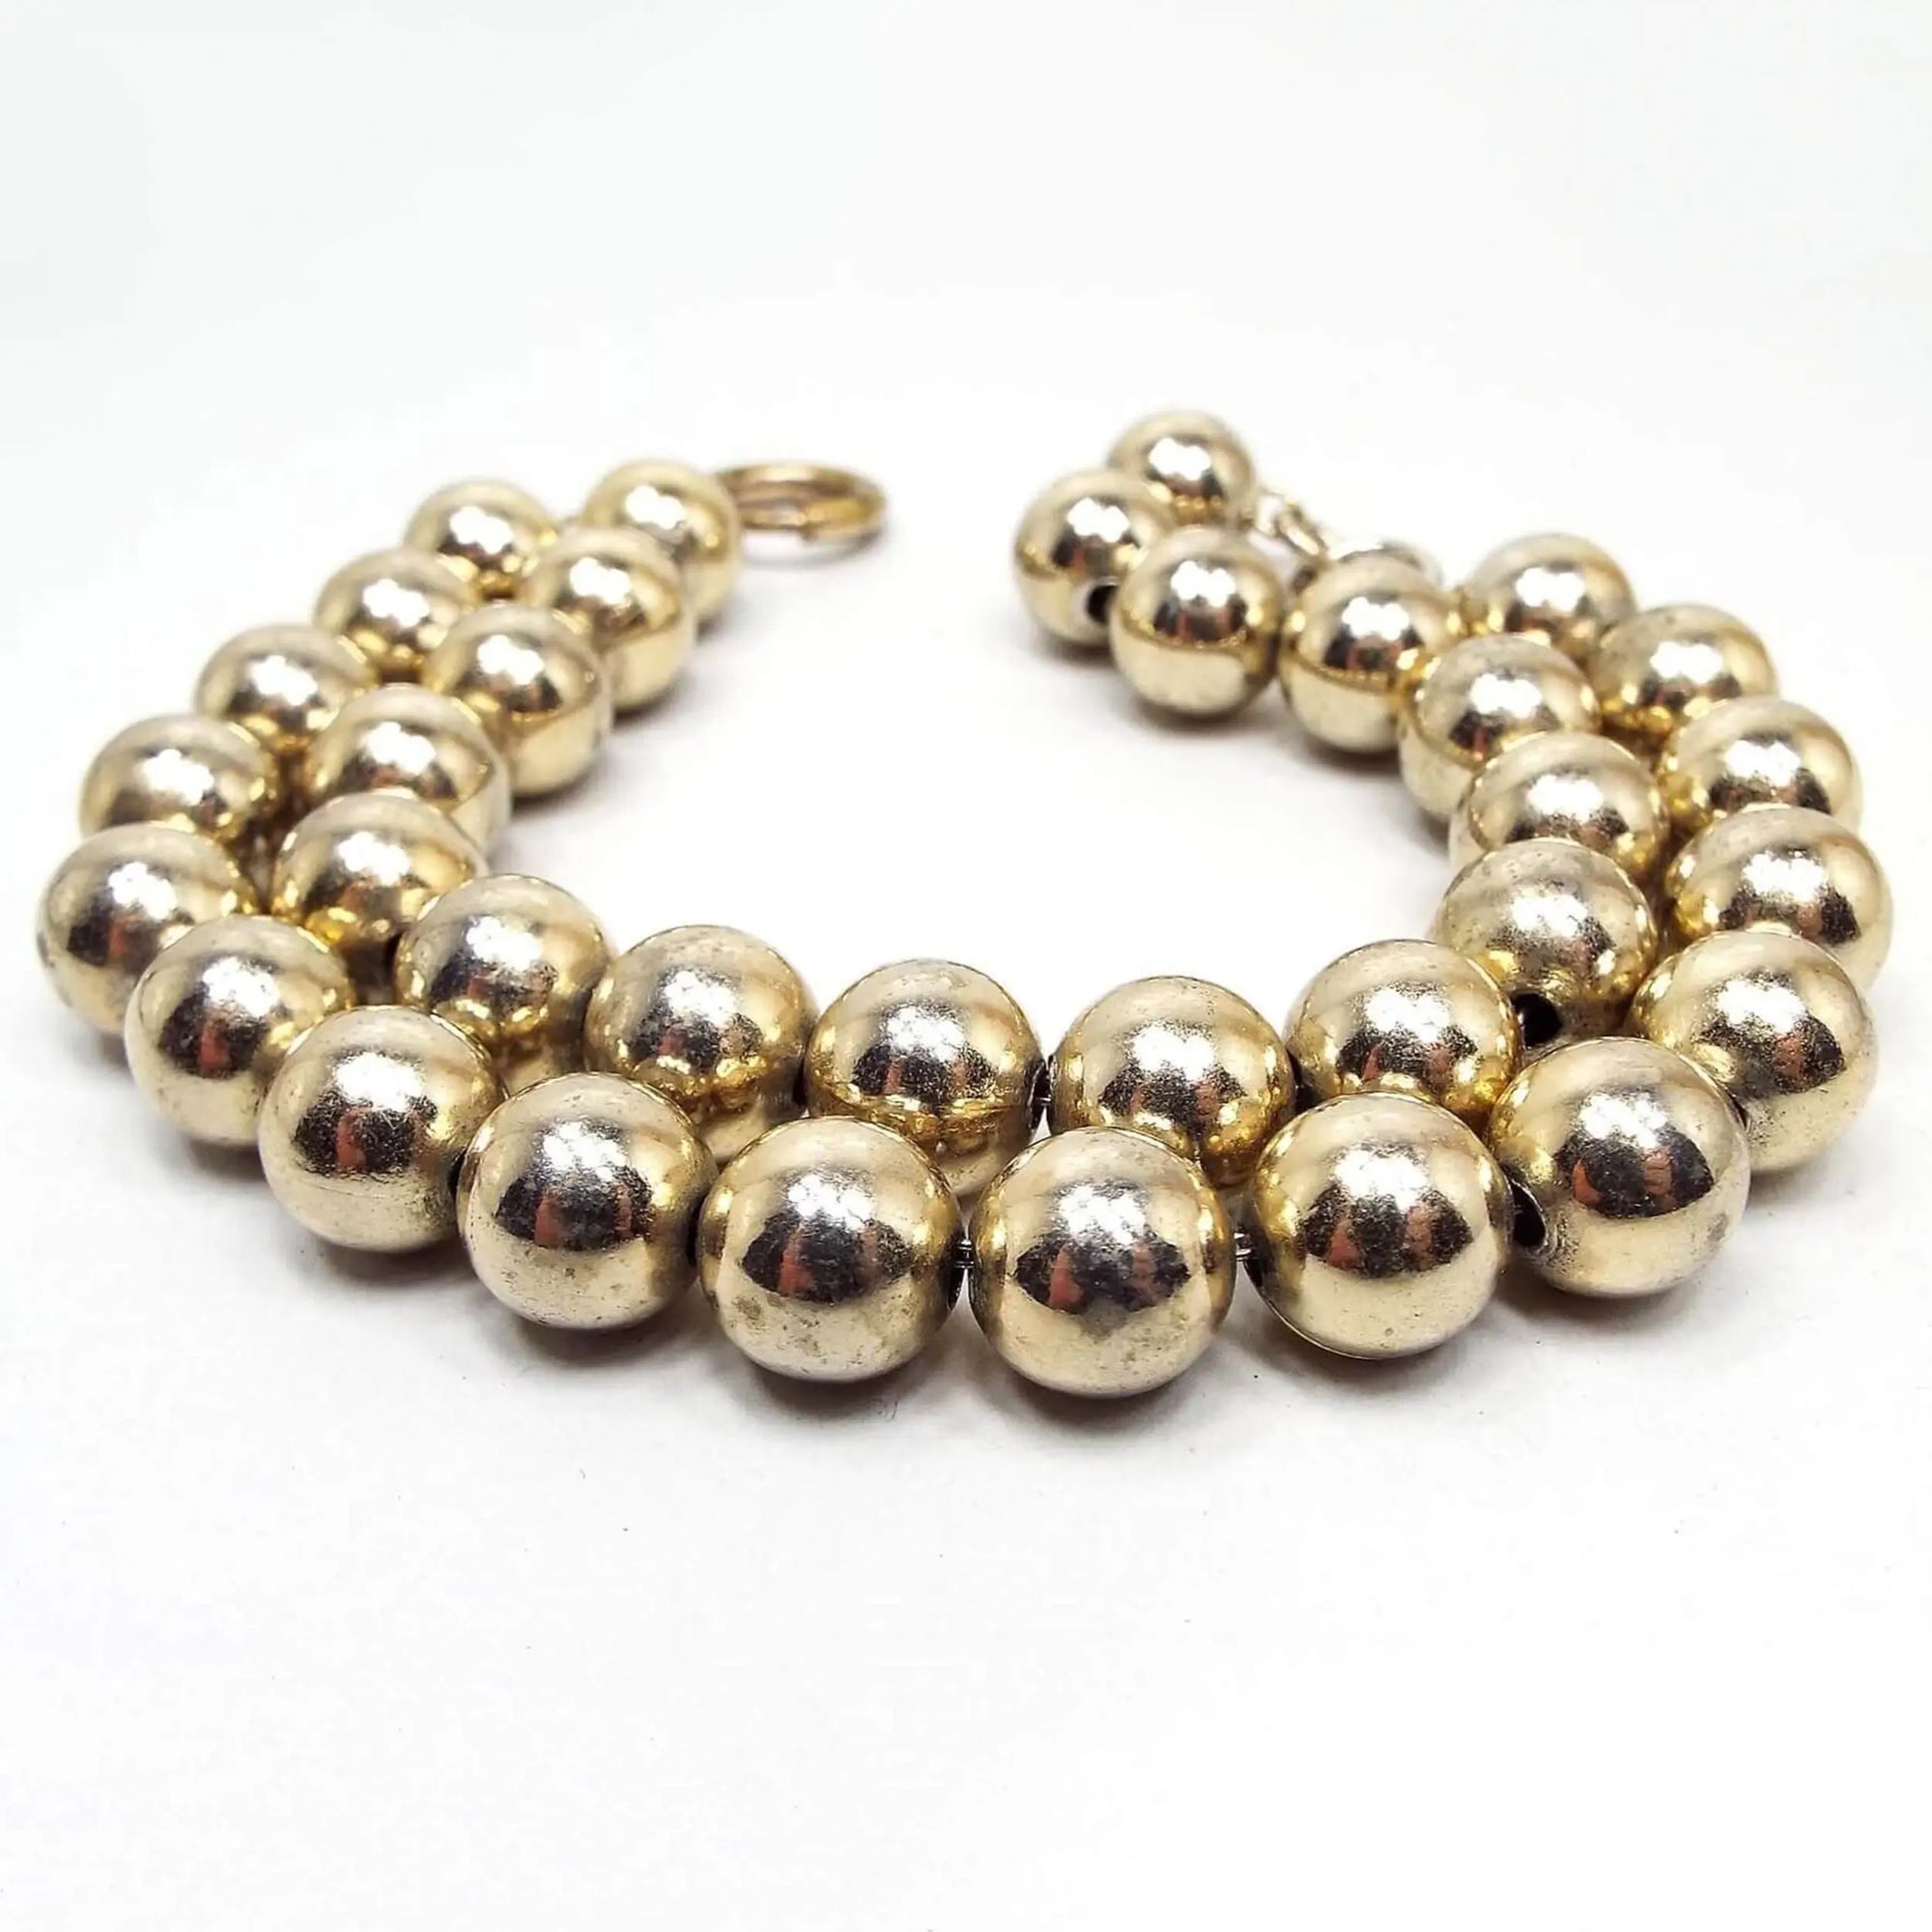 Angled view of the Mid Century vintage metal beaded bracelet. There are two strands of gold tone metal ball beads strung on thin wire. The end has a spring ring clasp.